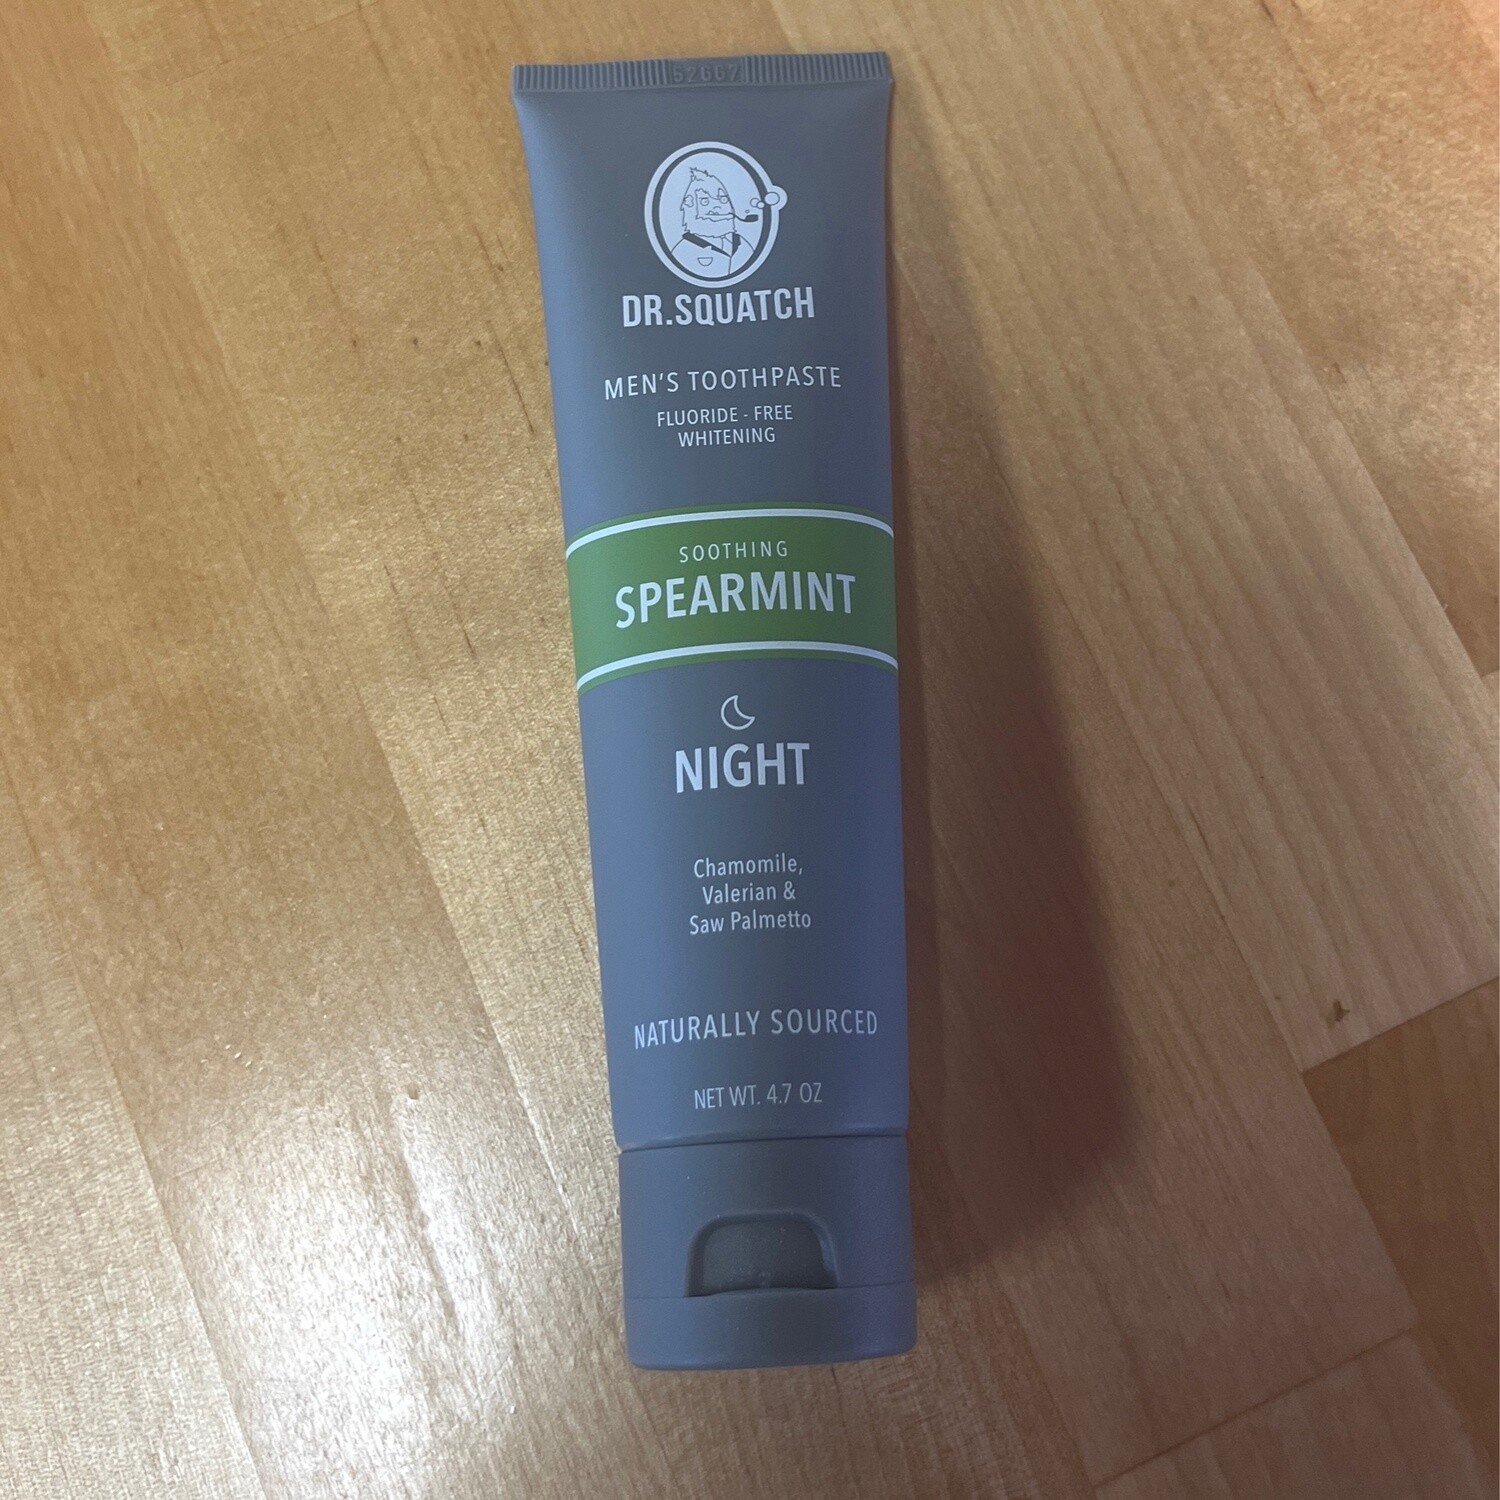 Soothing spearmint Night Toothpaste